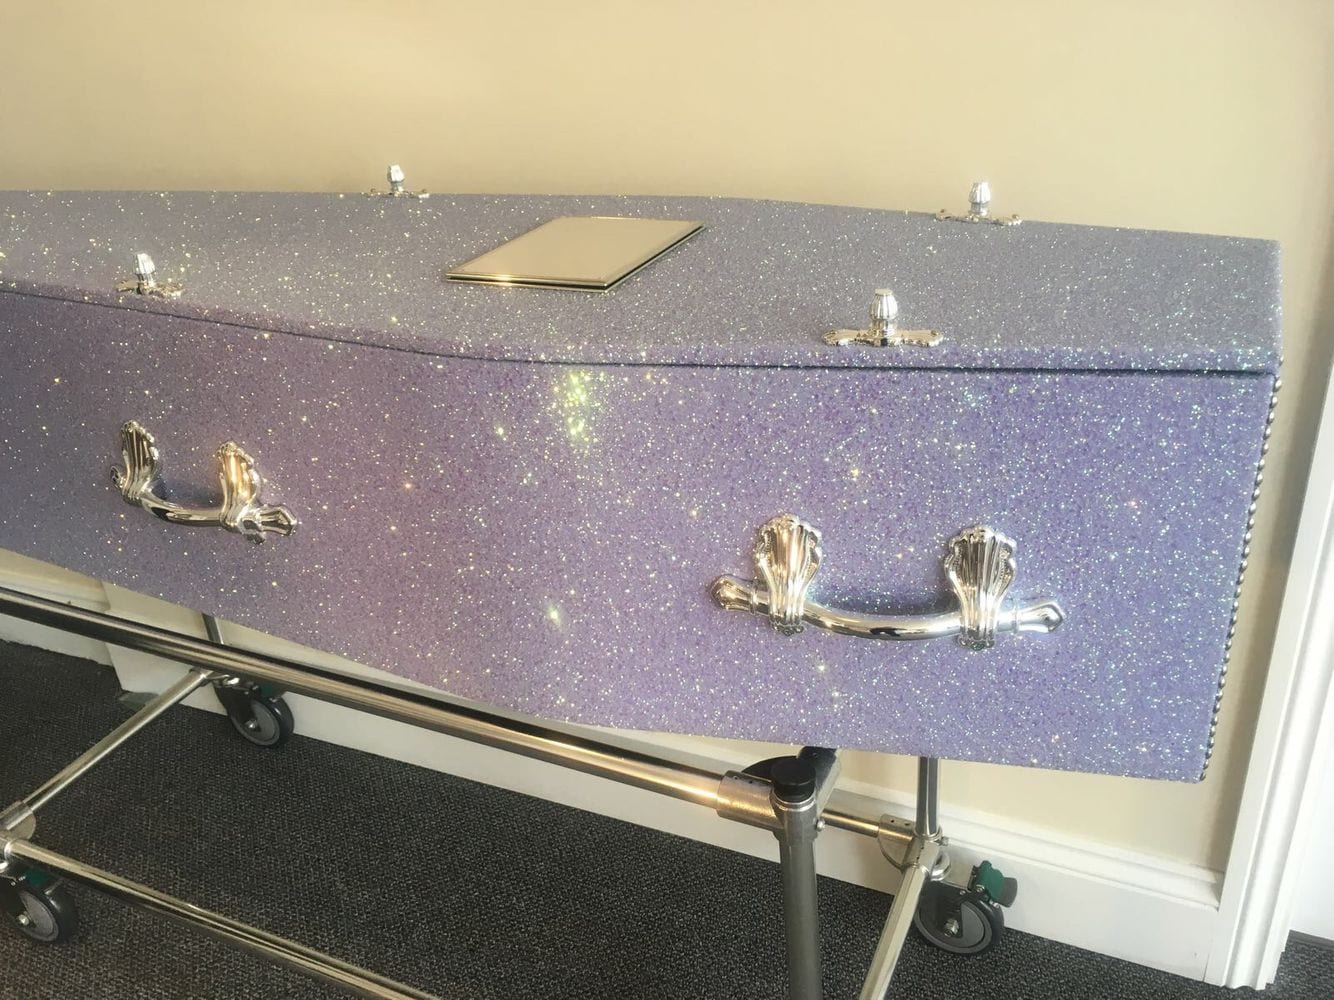 This company sells glitter coffins for people who don't want to go quietly